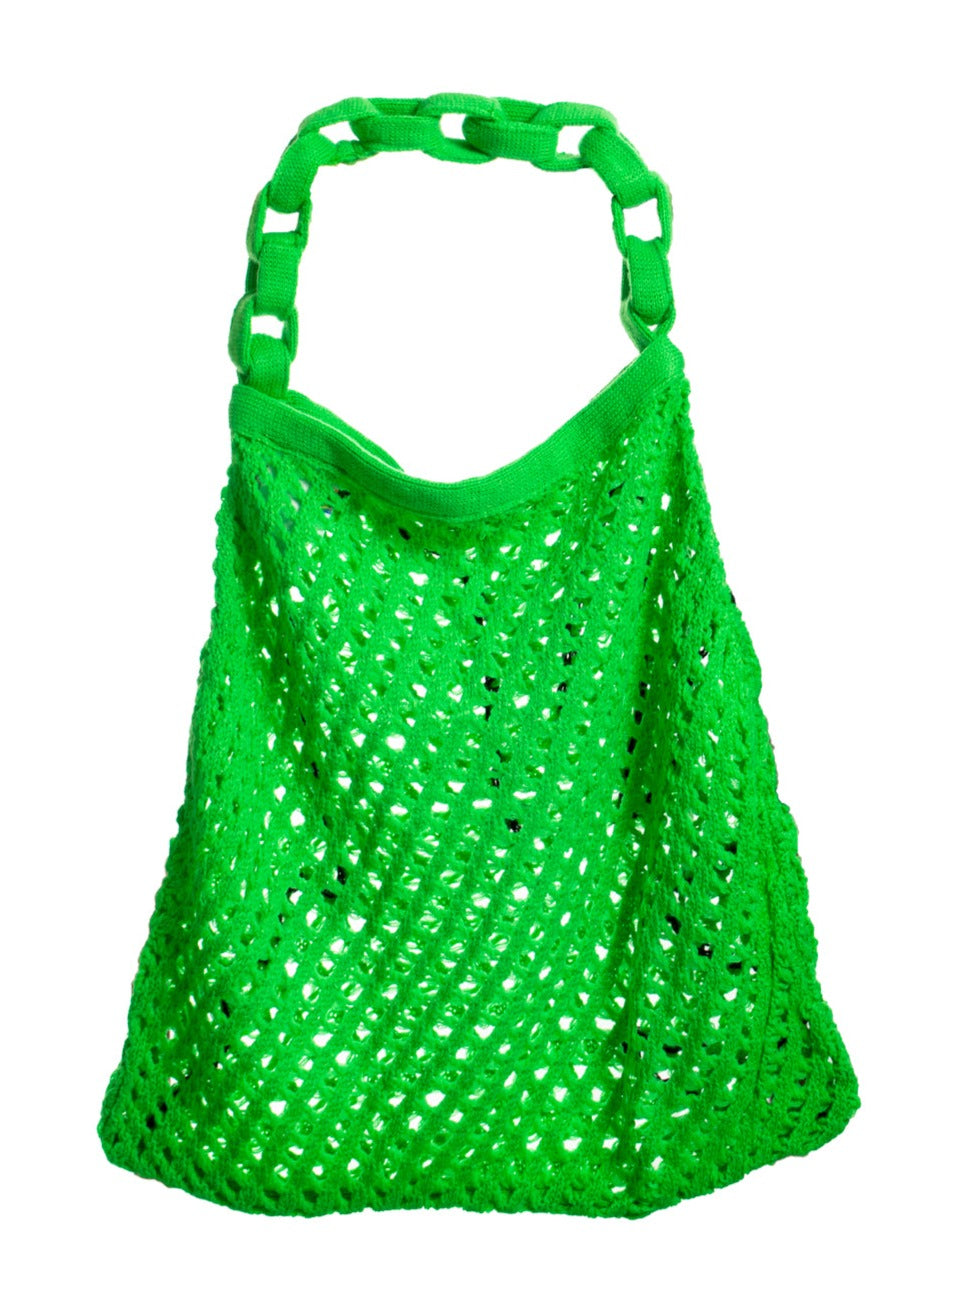 Tote Bag Knitted Green